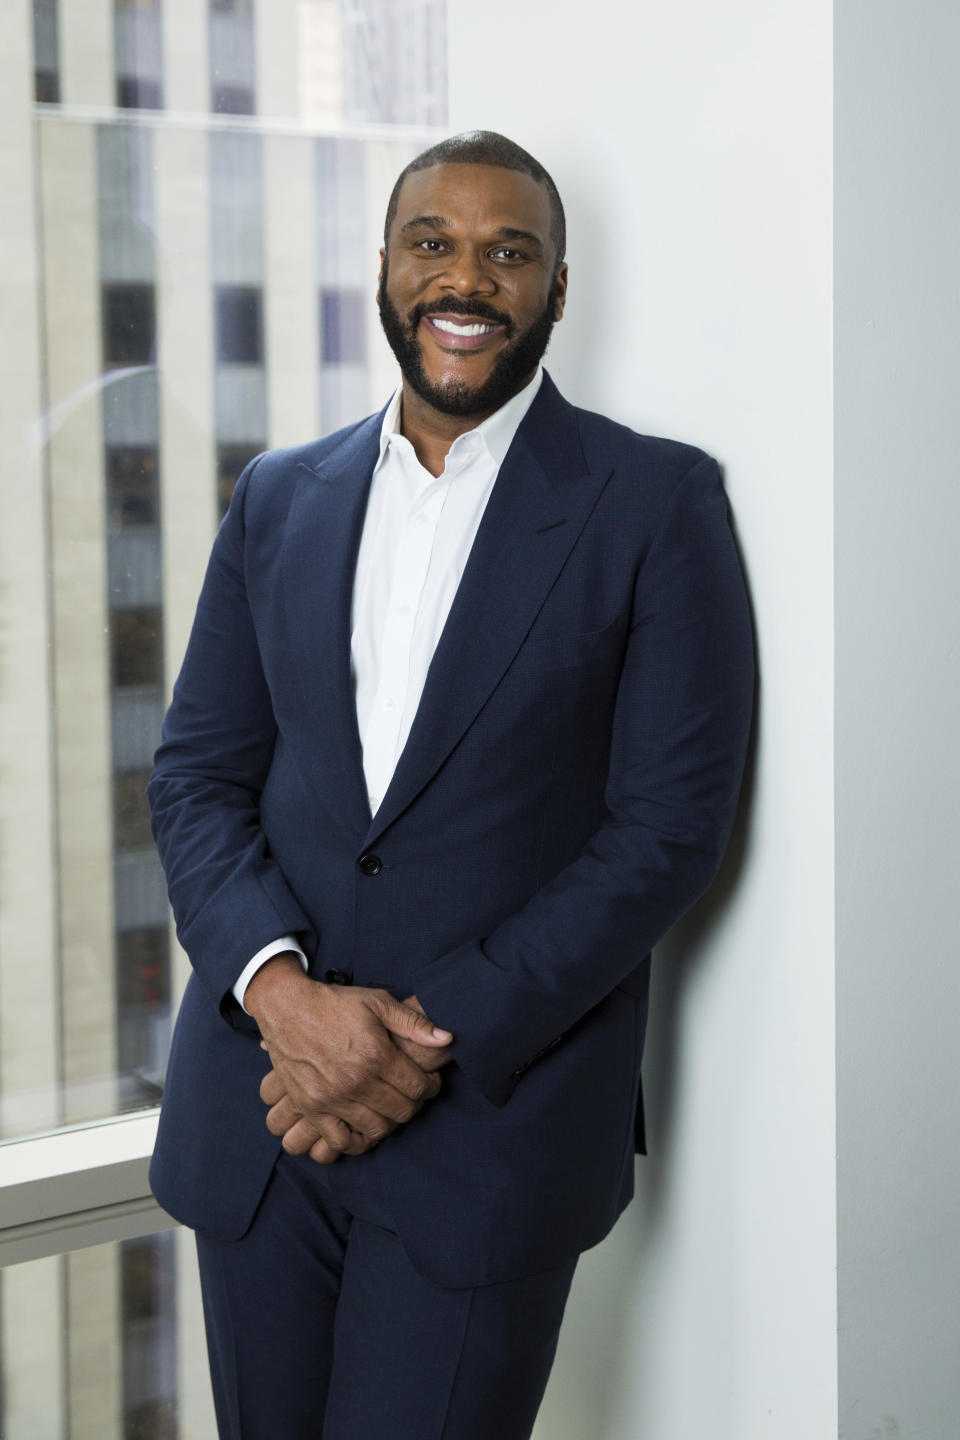 FILE - In this Nov. 16, 2017 photo, actor-filmmaker and author Tyler Perry poses for a portrait in New York. Perry and the Motion Picture and Television Fund are being honored with the Jean Hersholt Humanitarian Award, the Academy of Motion Picture Arts and Sciences said Thursday. Perry and the MPTF will receive their Oscar statuettes at the 93rd Academy Awards on April 25. (Photo by Amy Sussman/Invision/AP, File)